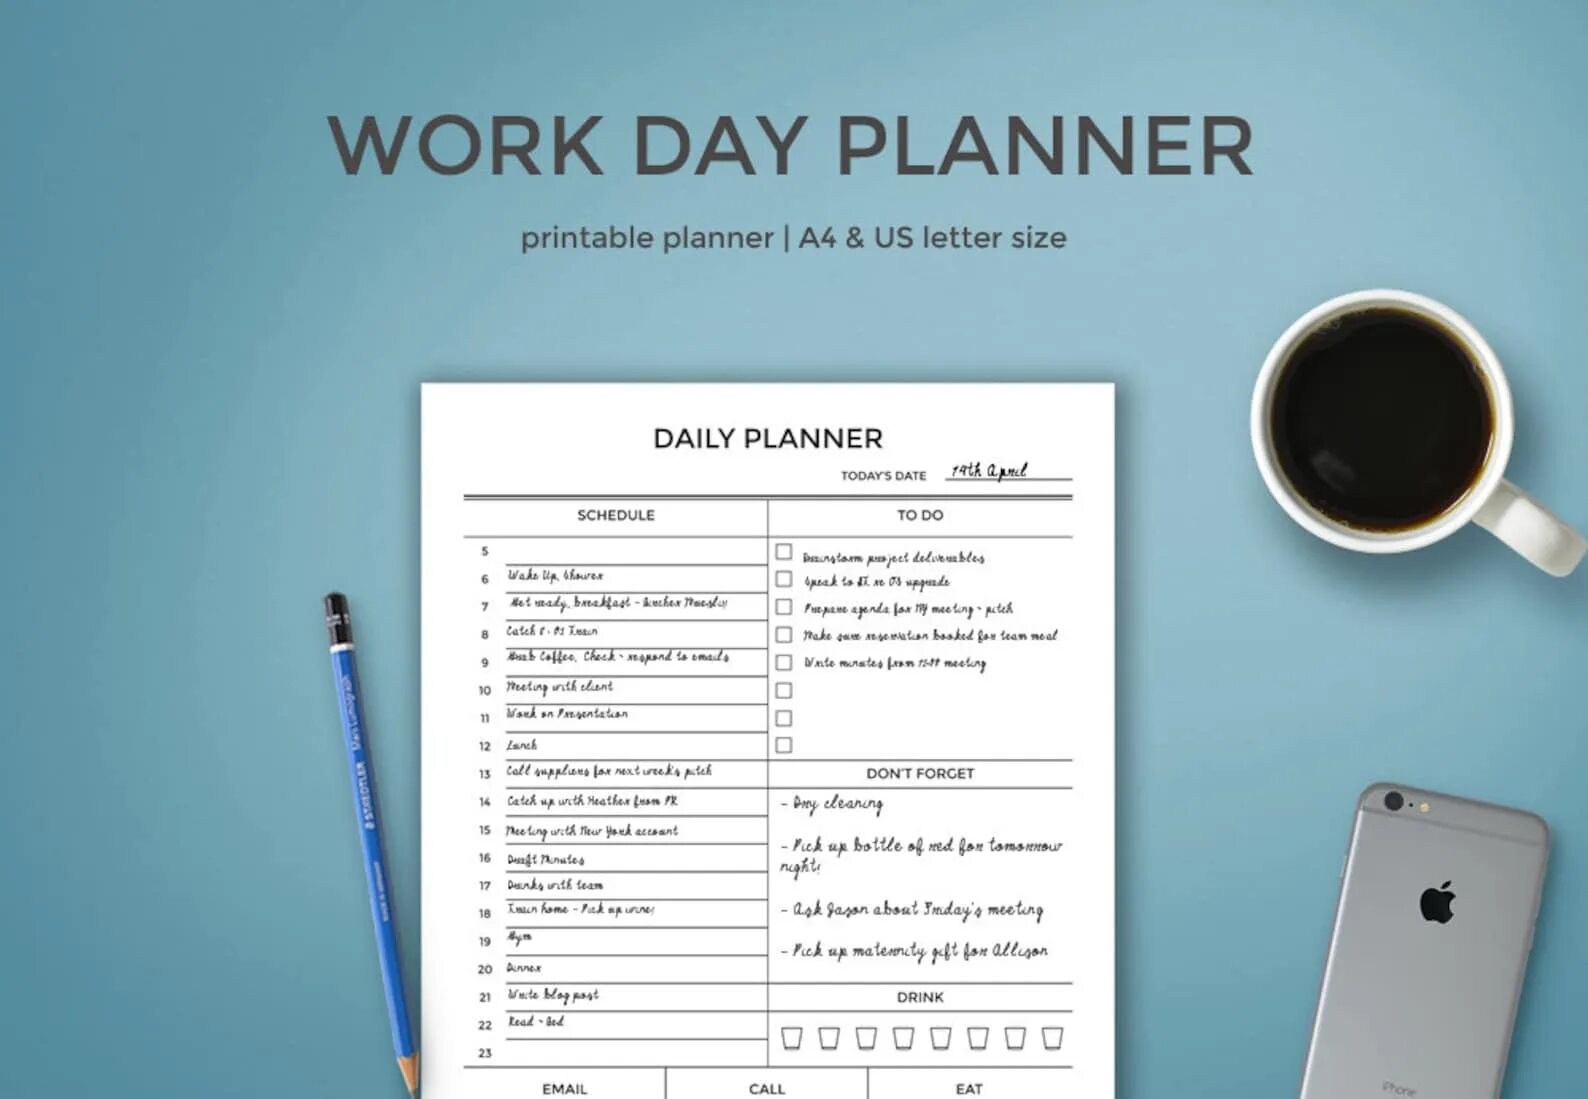 Daily Planner. Plan for the Day. Working Day Plan. Planner for Day. Planning your day